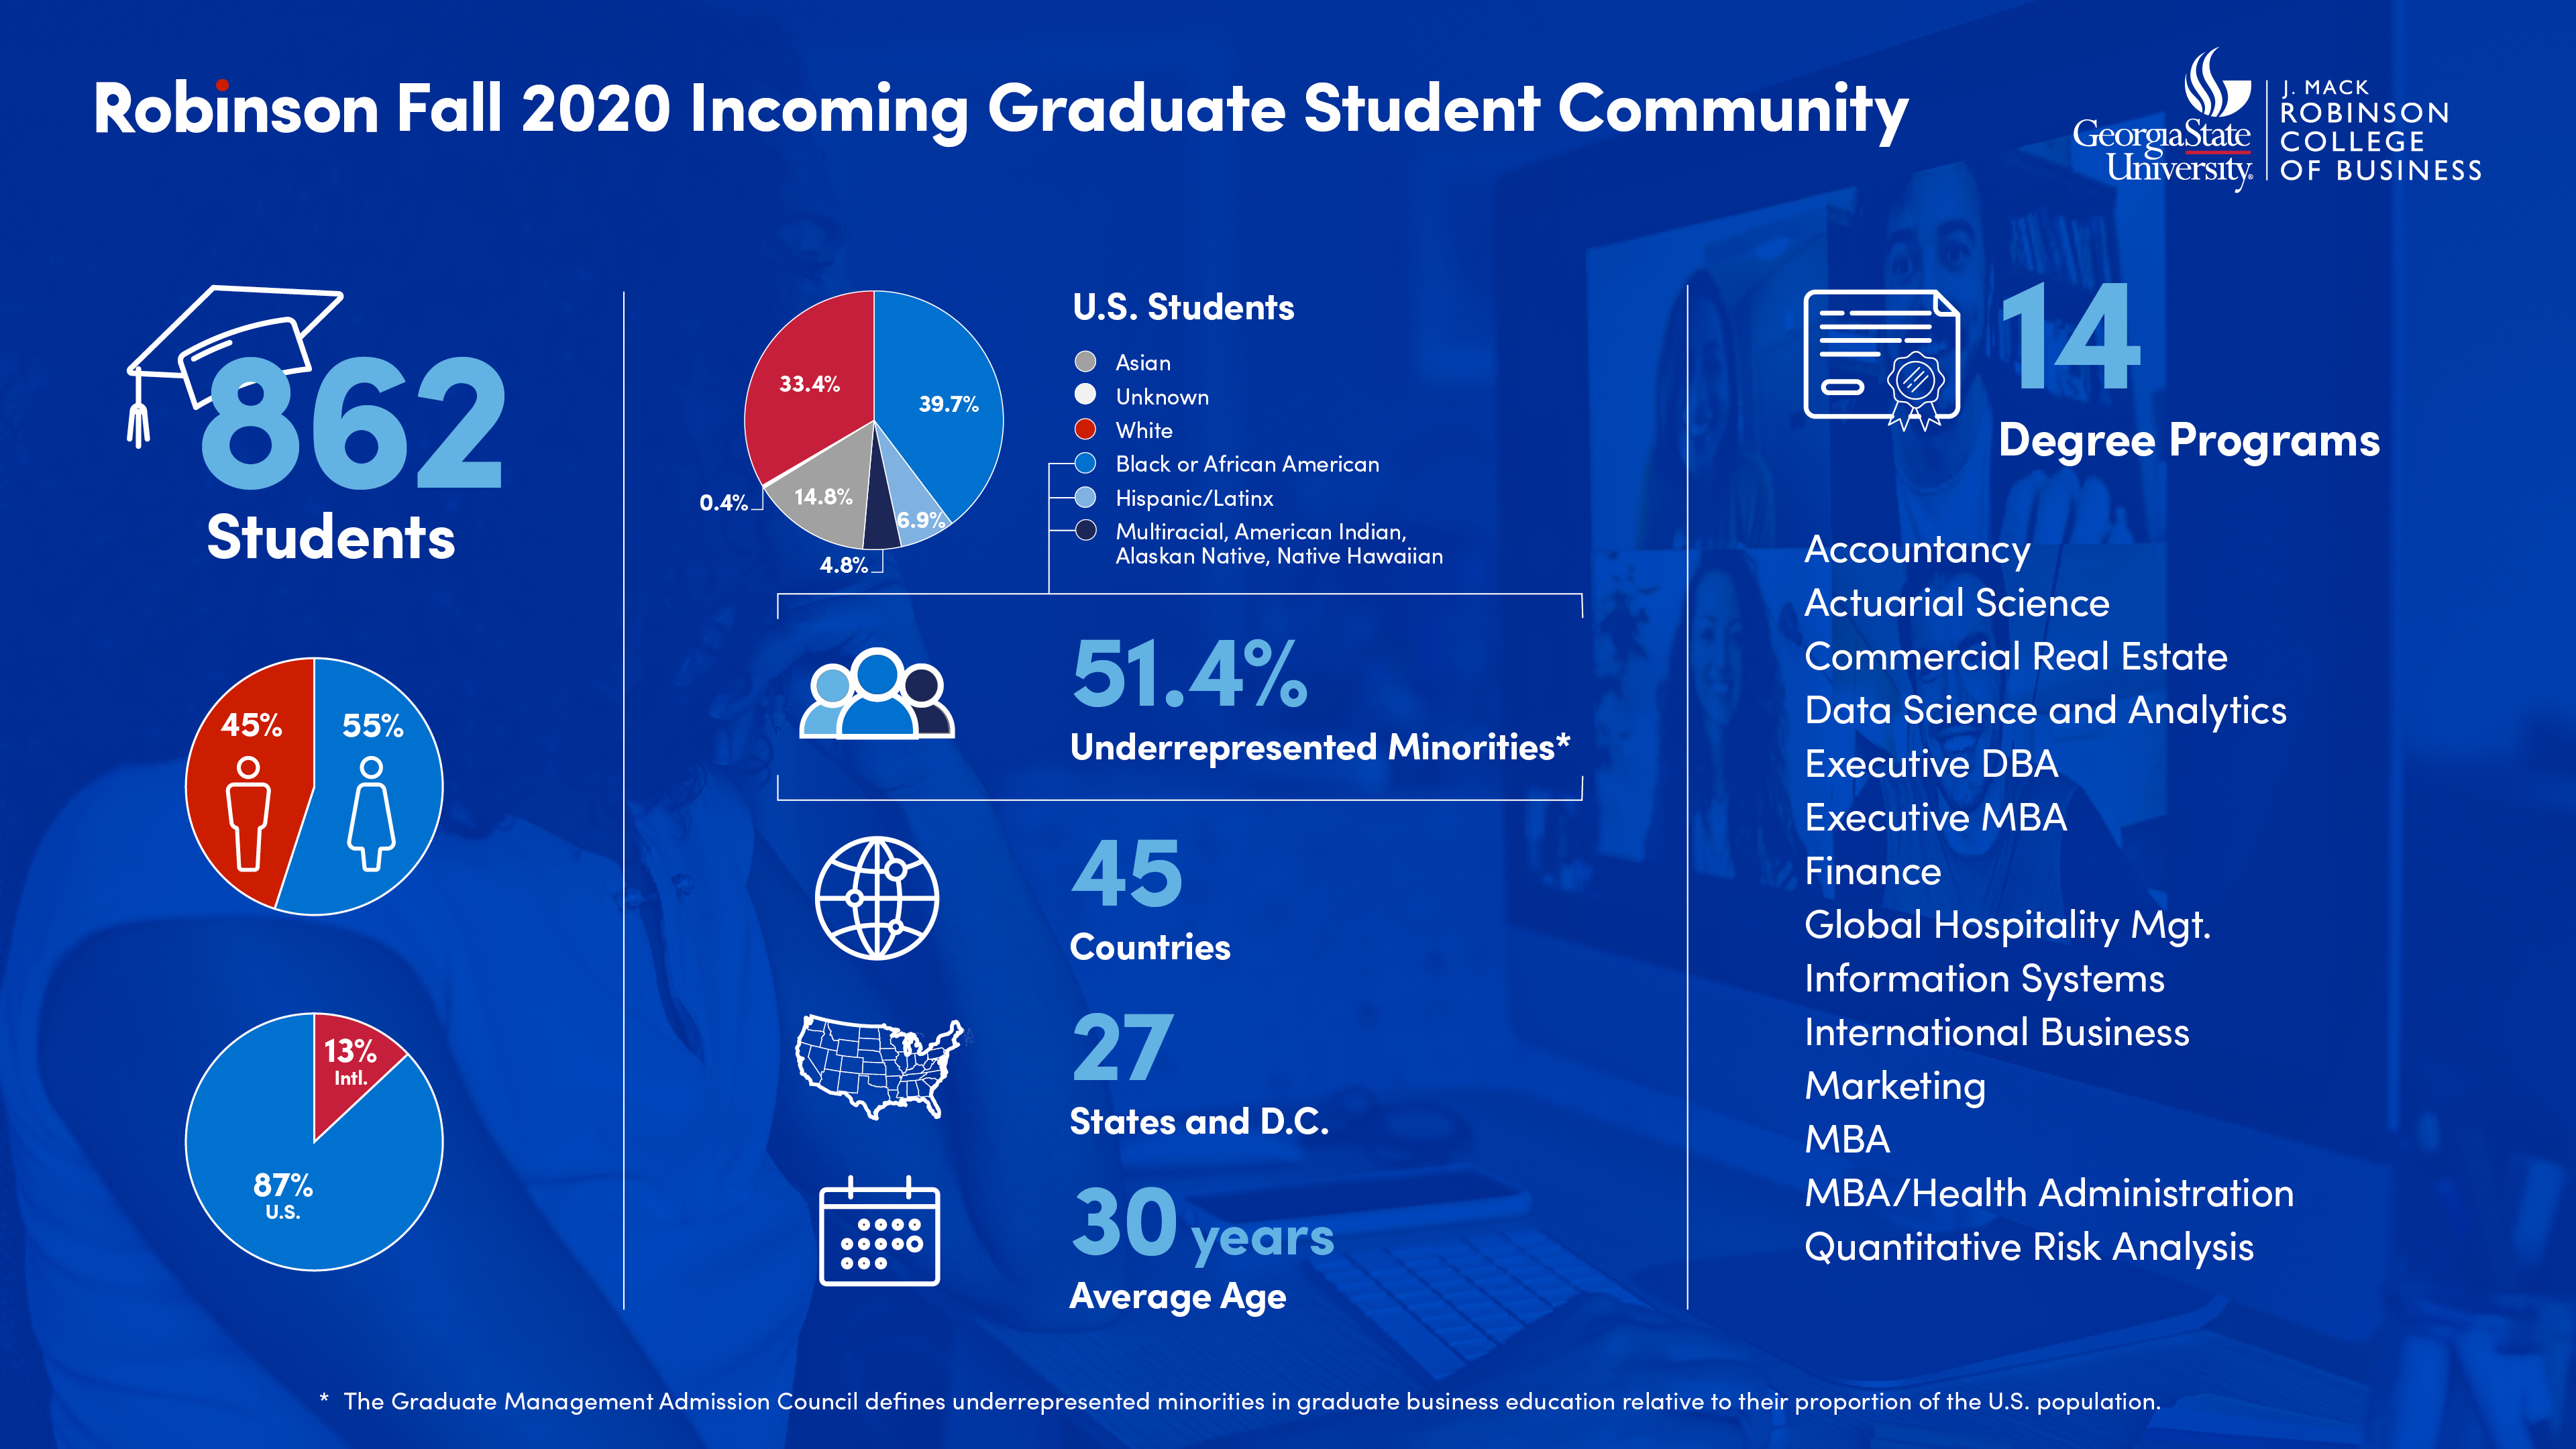 The incoming fall 2020 graduate school class is the largest and most diverse ever to enroll in the history of the Robinson College of Business.